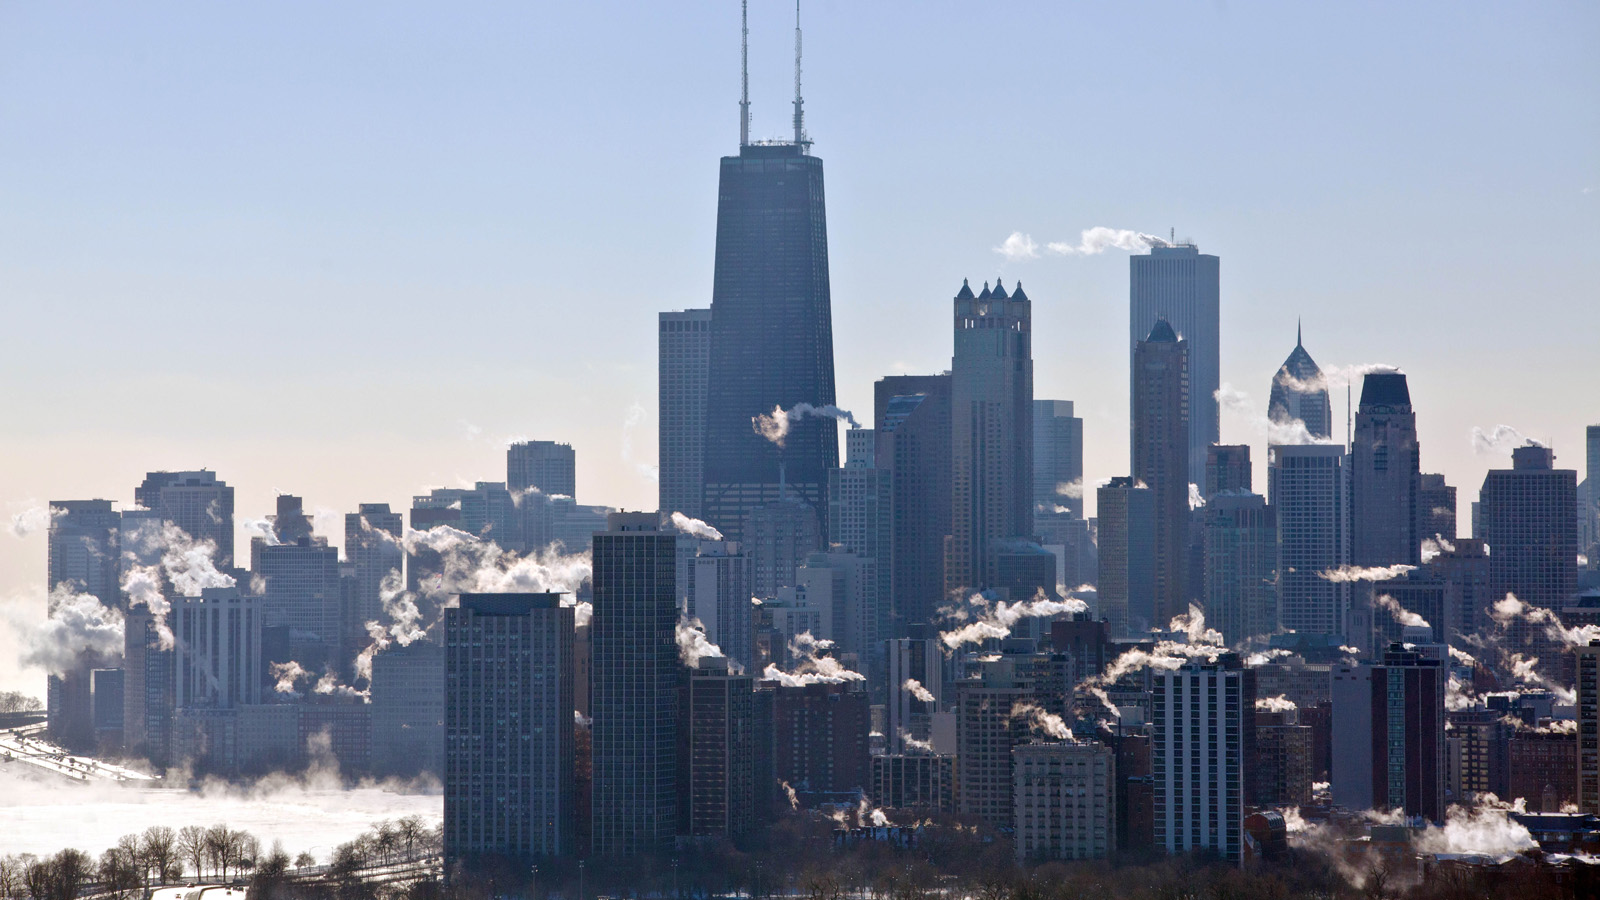 21 Pictures Of Chicago’s Modern-Day Ice Age